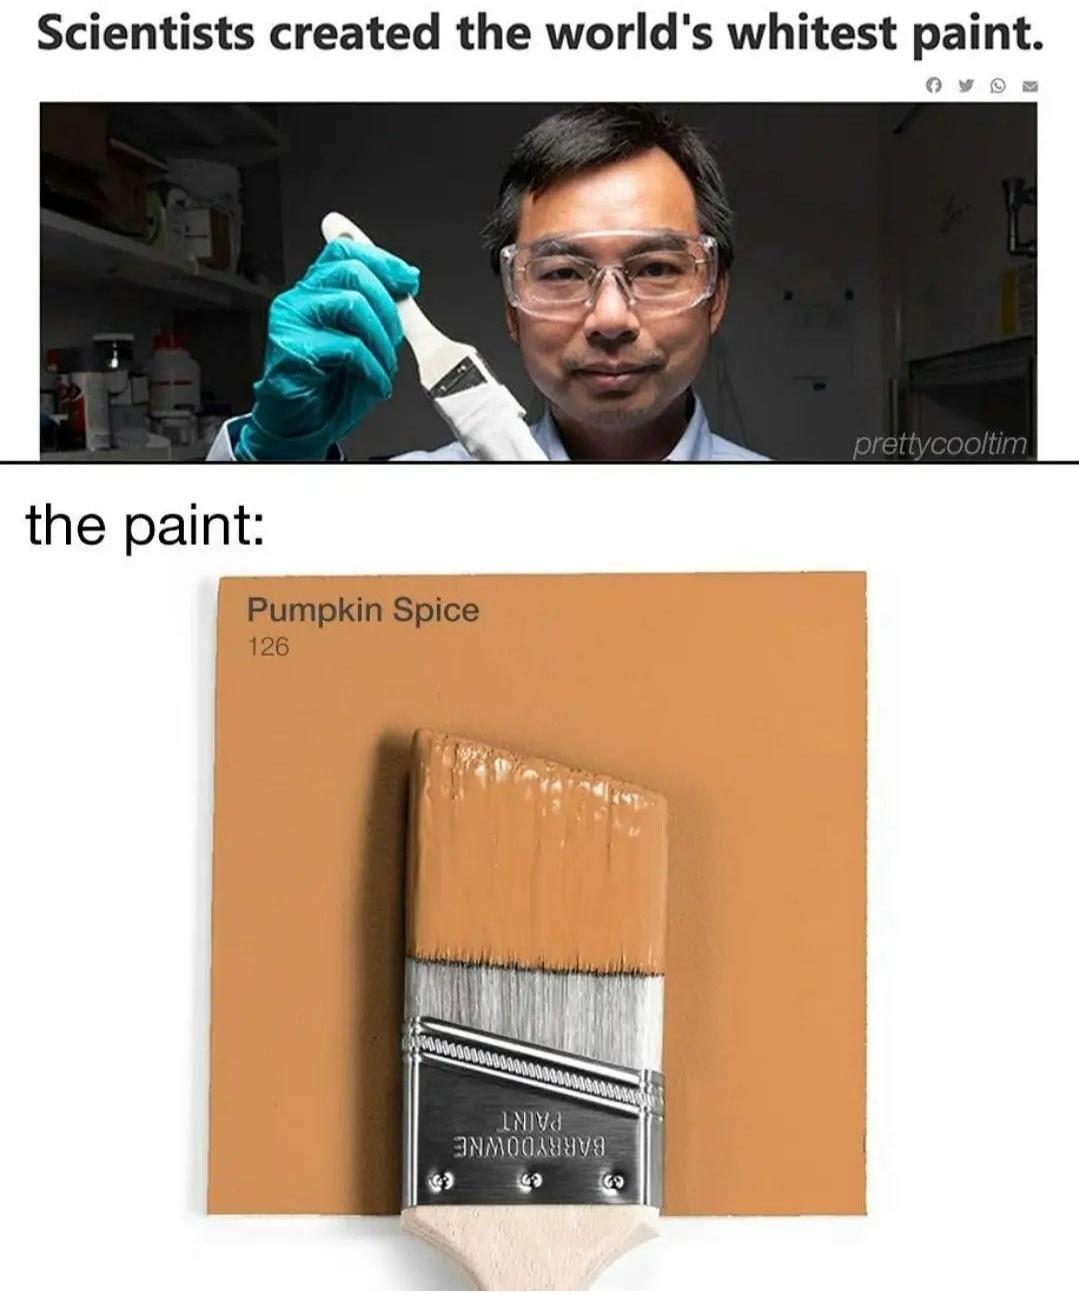 funny memes - halloween memes - benjamin moore storm af 700 - Scientists created the world's whitest paint. prettycooltim the paint Pumpkin Spice 126 Inivs 3NMOON98 G9